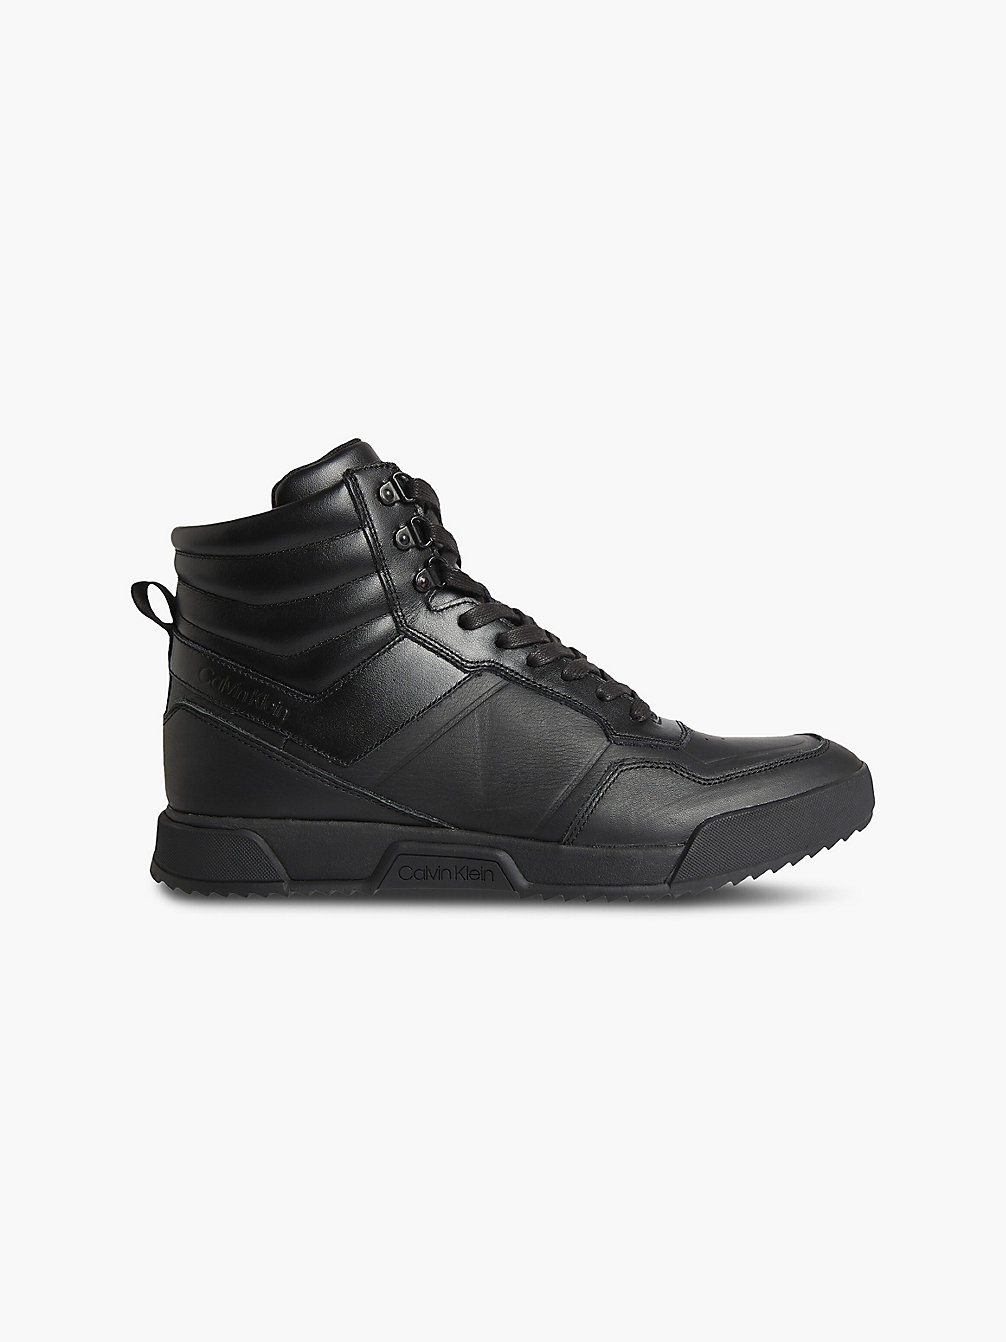 TRIPLE BLACK Leather High-Top Trainers undefined men Calvin Klein